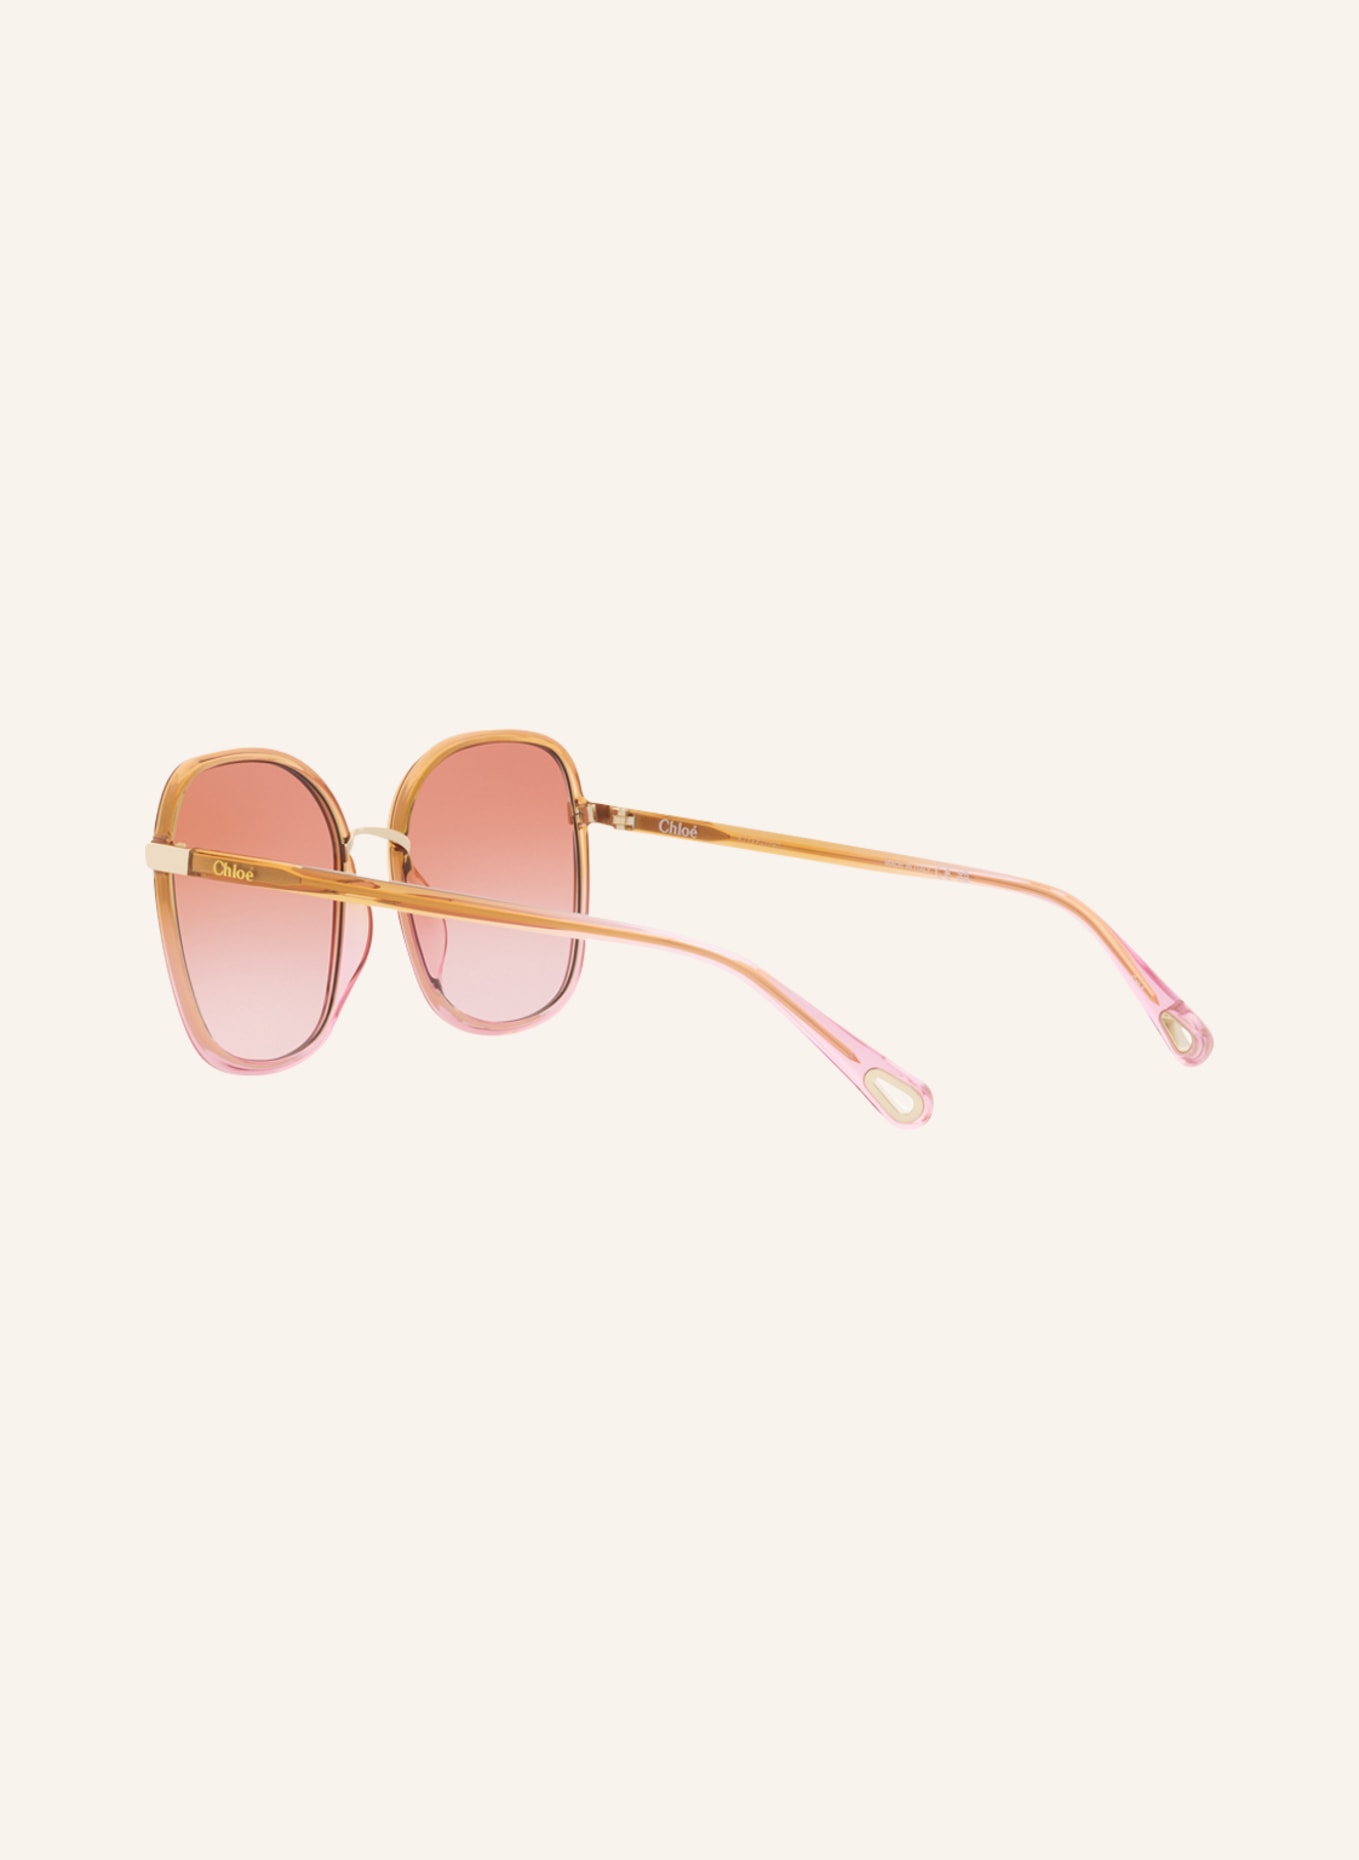 Chloé Sunglasses CH0031S, Color: 5000P1 - YELLOW/ PINK/ PINK GRADIENT (Image 4)